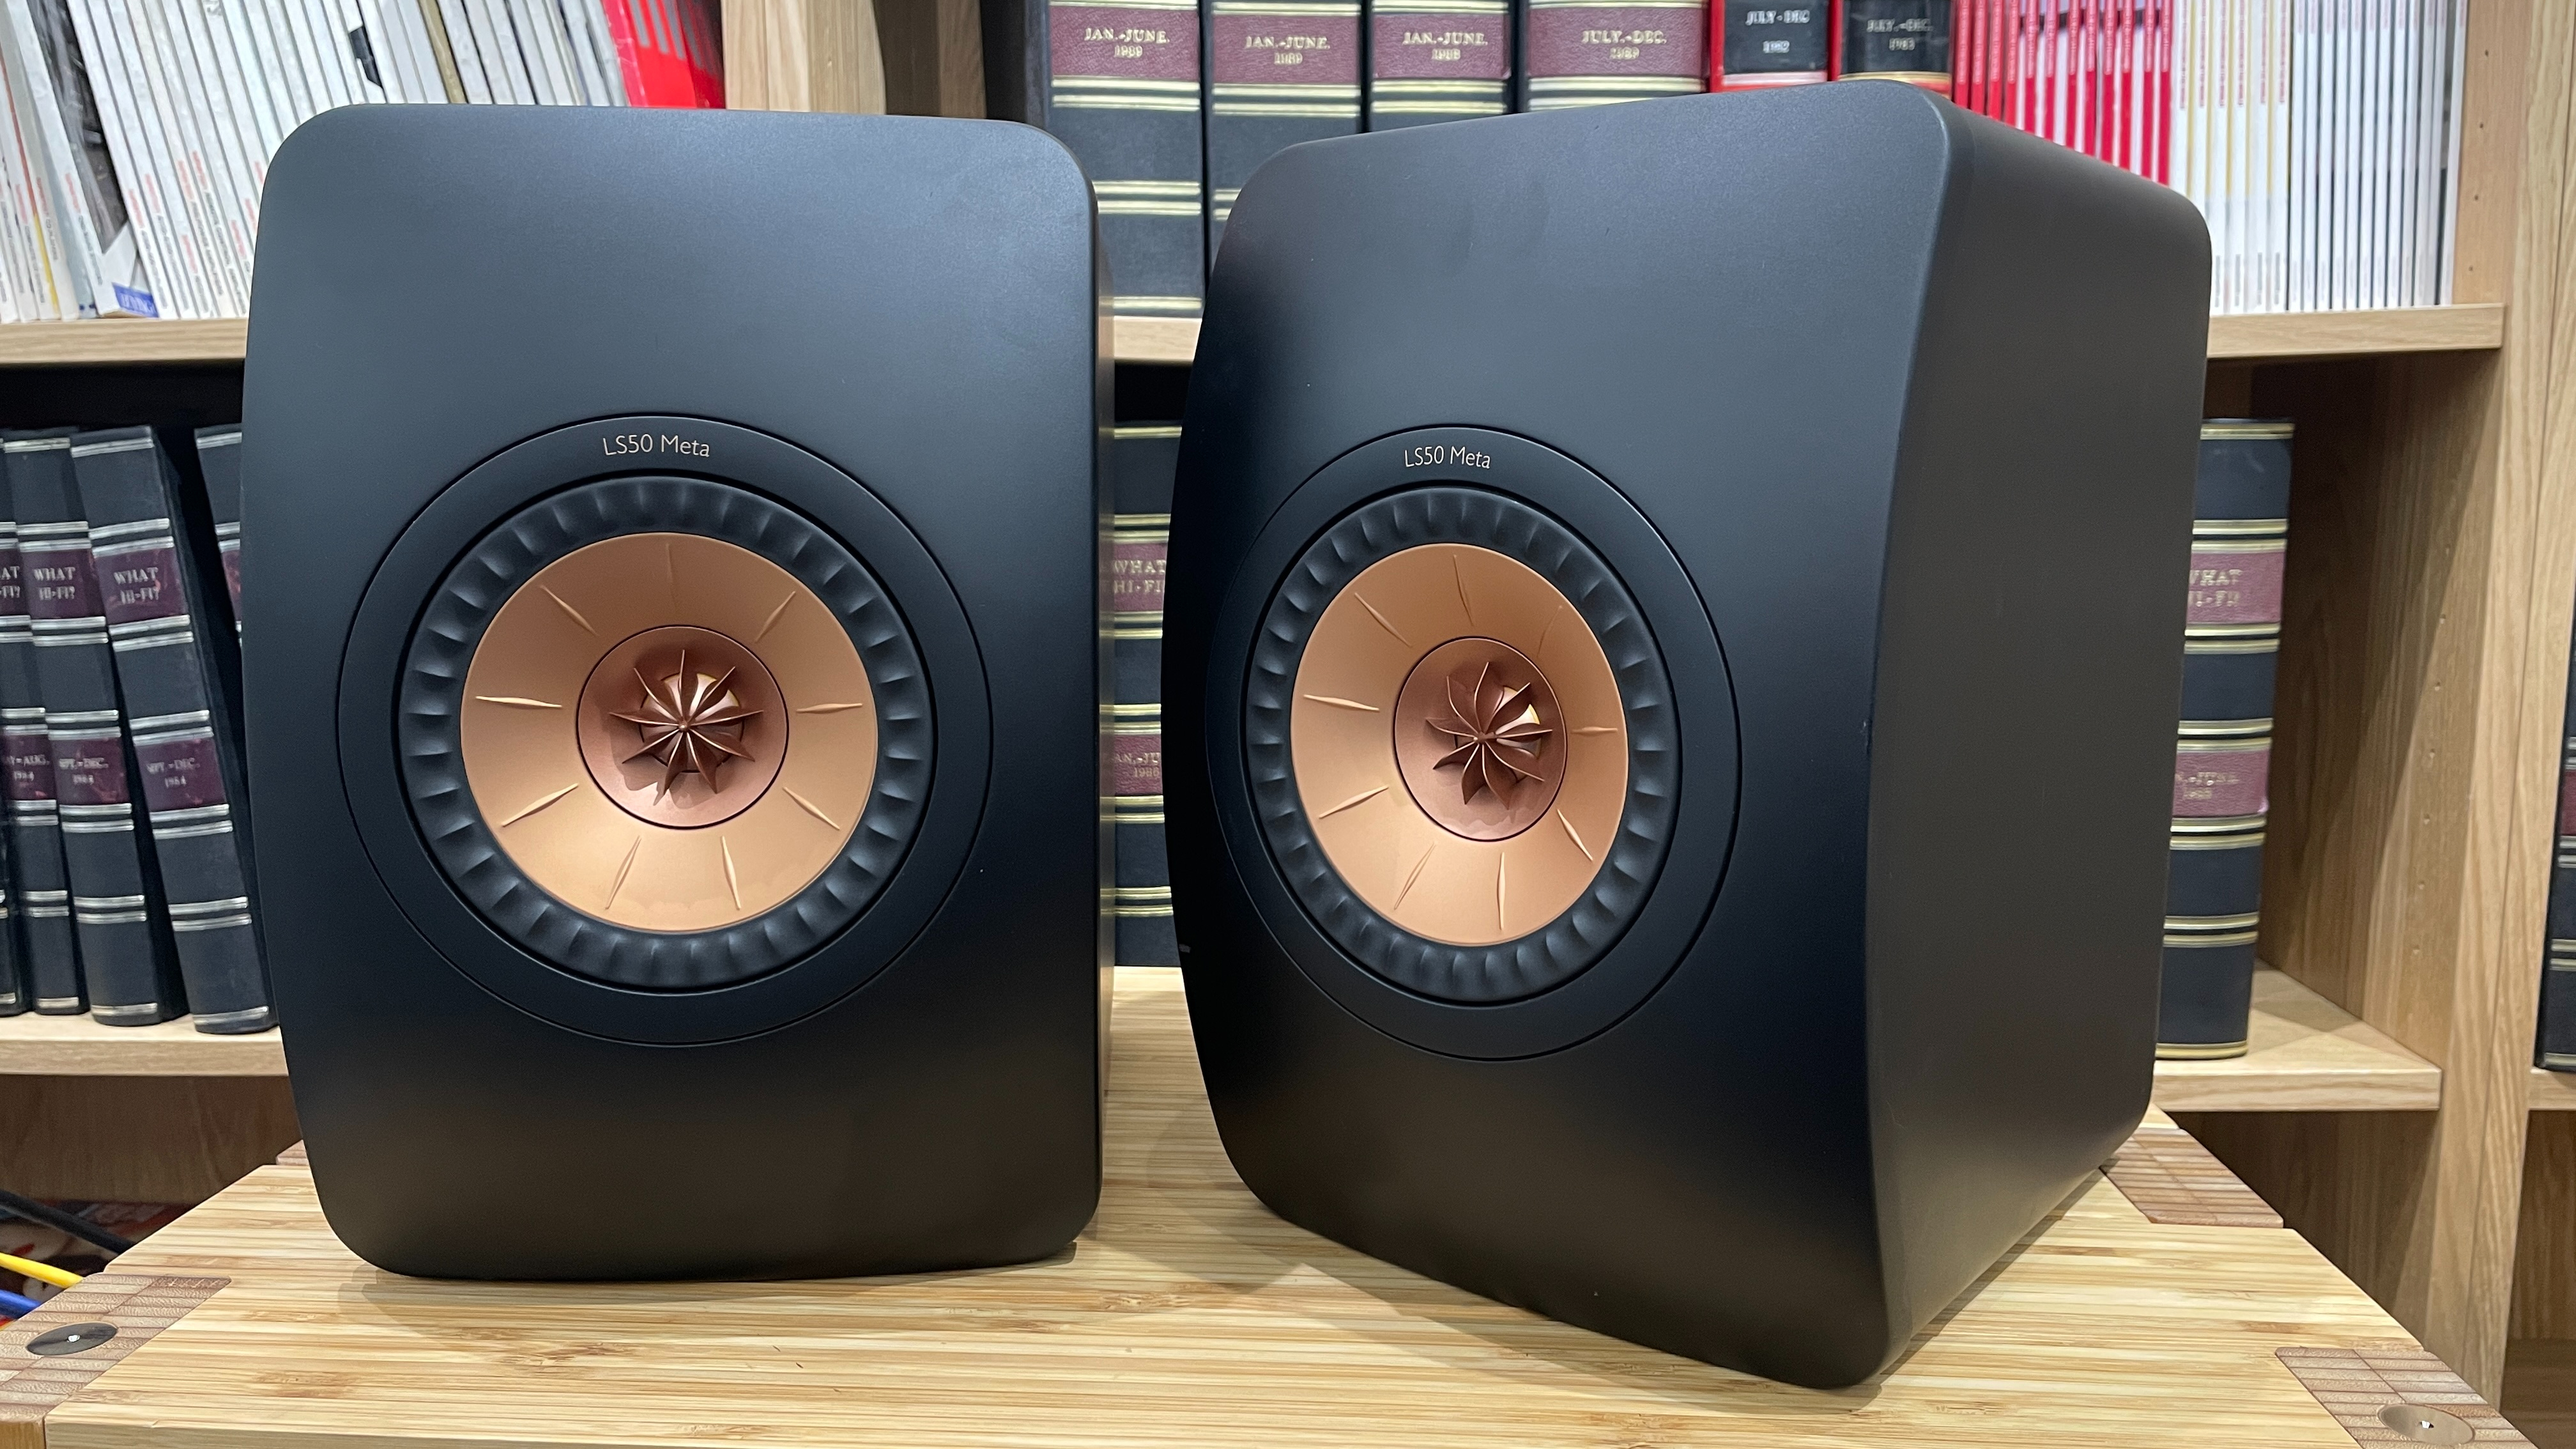 KEF LS50 Meta stereo speakers on wooden equipment rank with books in background